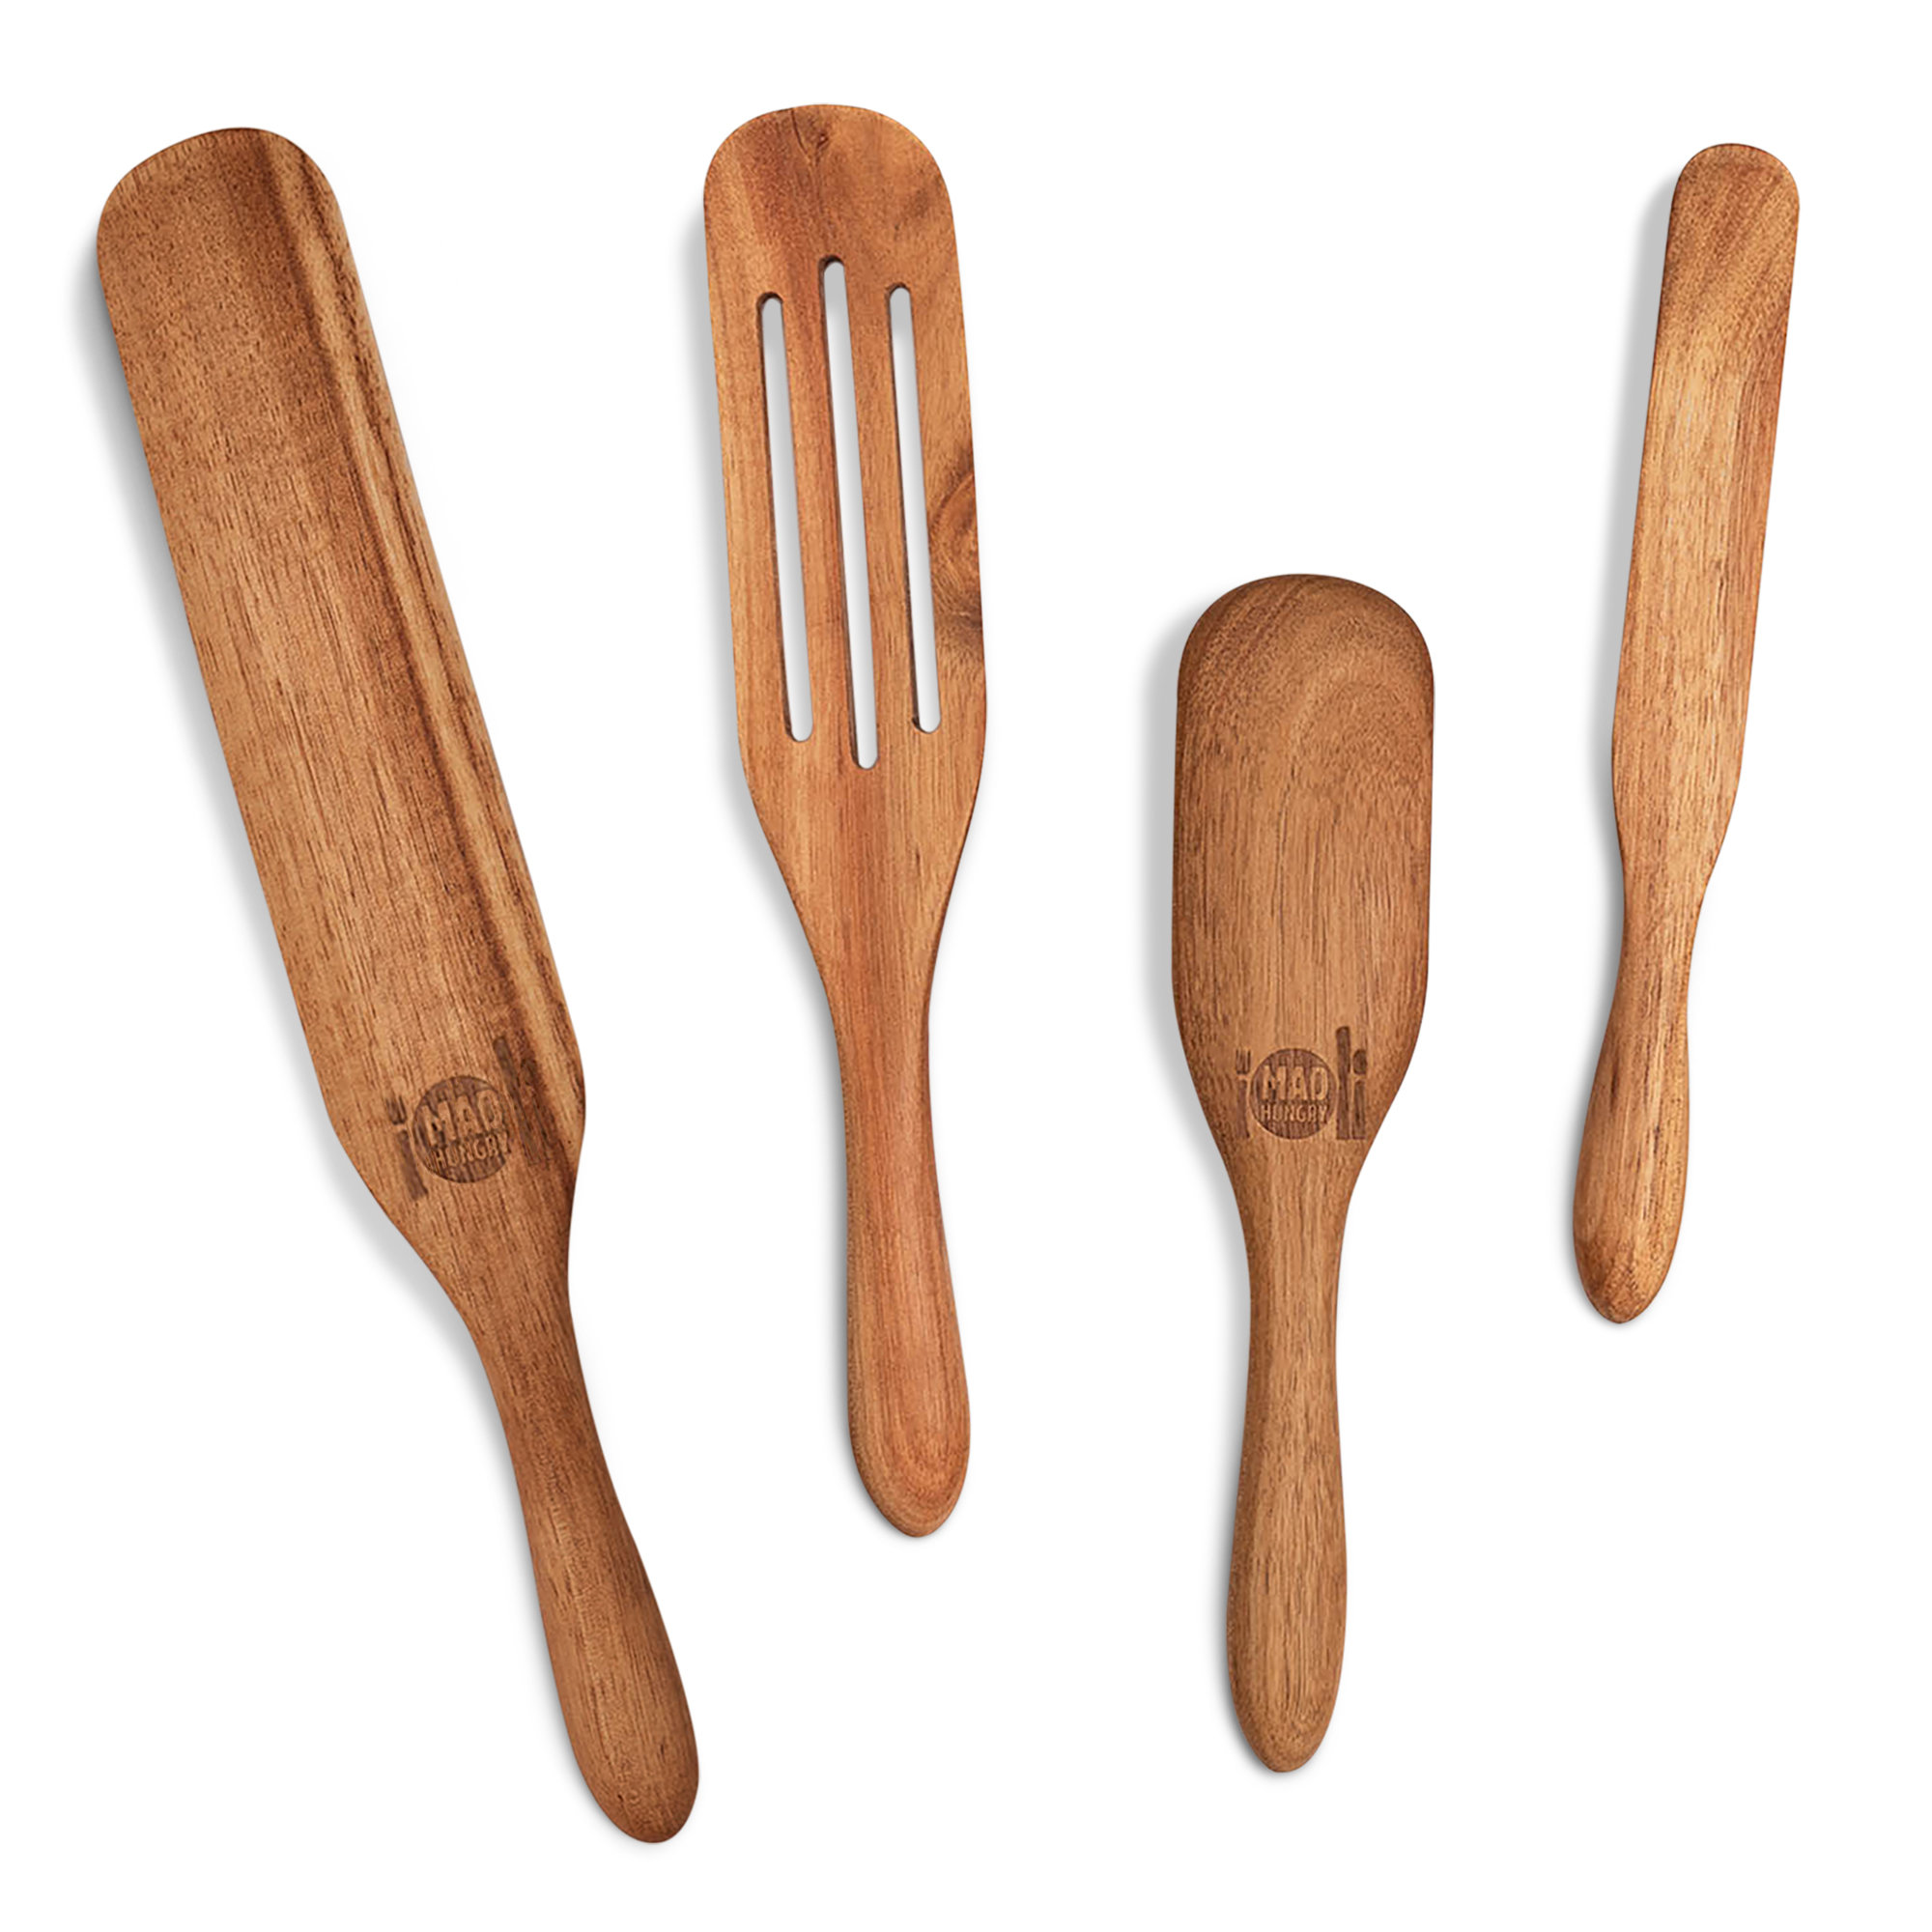 Every Kitchen Needs a Spurtle & You Can Buy A Set For Less Than